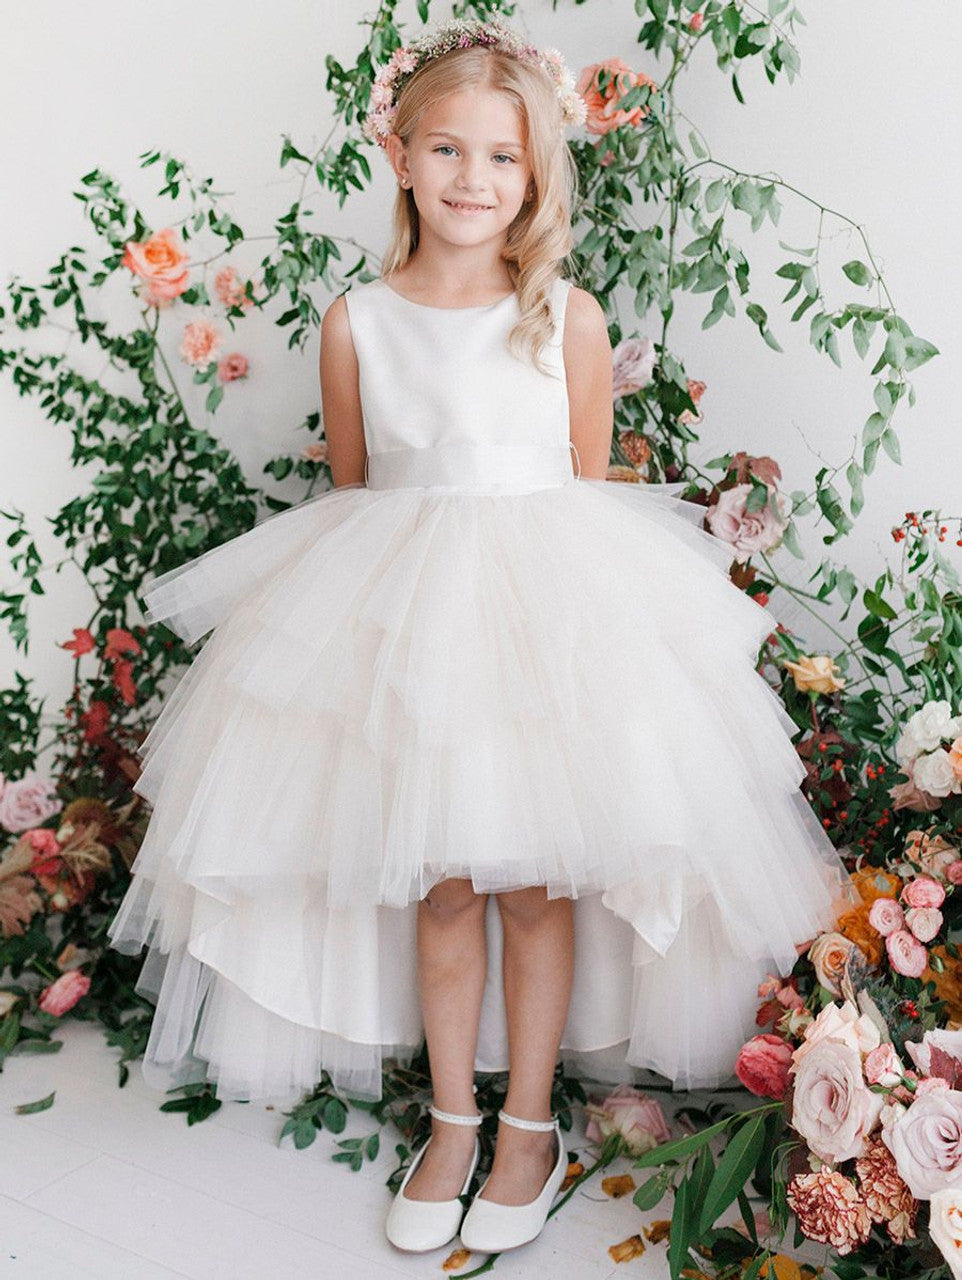 This Tip Top 5658 Girls Layered Tulle High Low Skirt Formal Dress is a perfect choice for that special day. The tulle high-low skirt, satin formal gown, and flower girl satin sash come together to create a beautiful, unique look perfect for flower girls, junior bridesmaids or formal occasions.  Sizes: 6M-16  Colors: Black, Blush, Burgundy, Eggplant, Ivory, Red, Royal Blue, White, Champagne, Lilac, Sky Blue